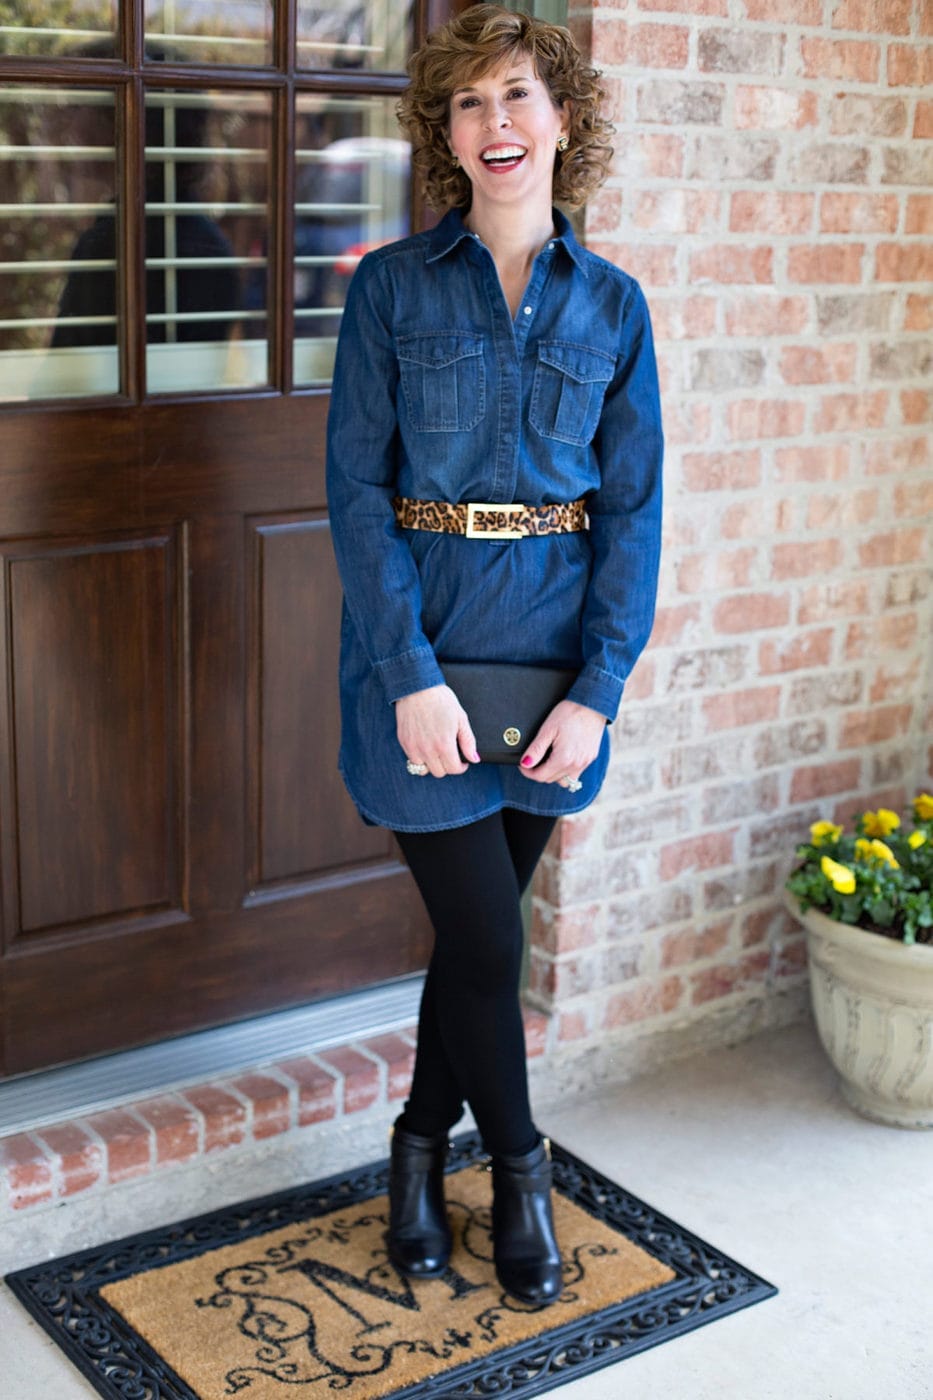 Trying Trends - Styling a Denim Skirt & Dress With Leggings + Boots for  Winter